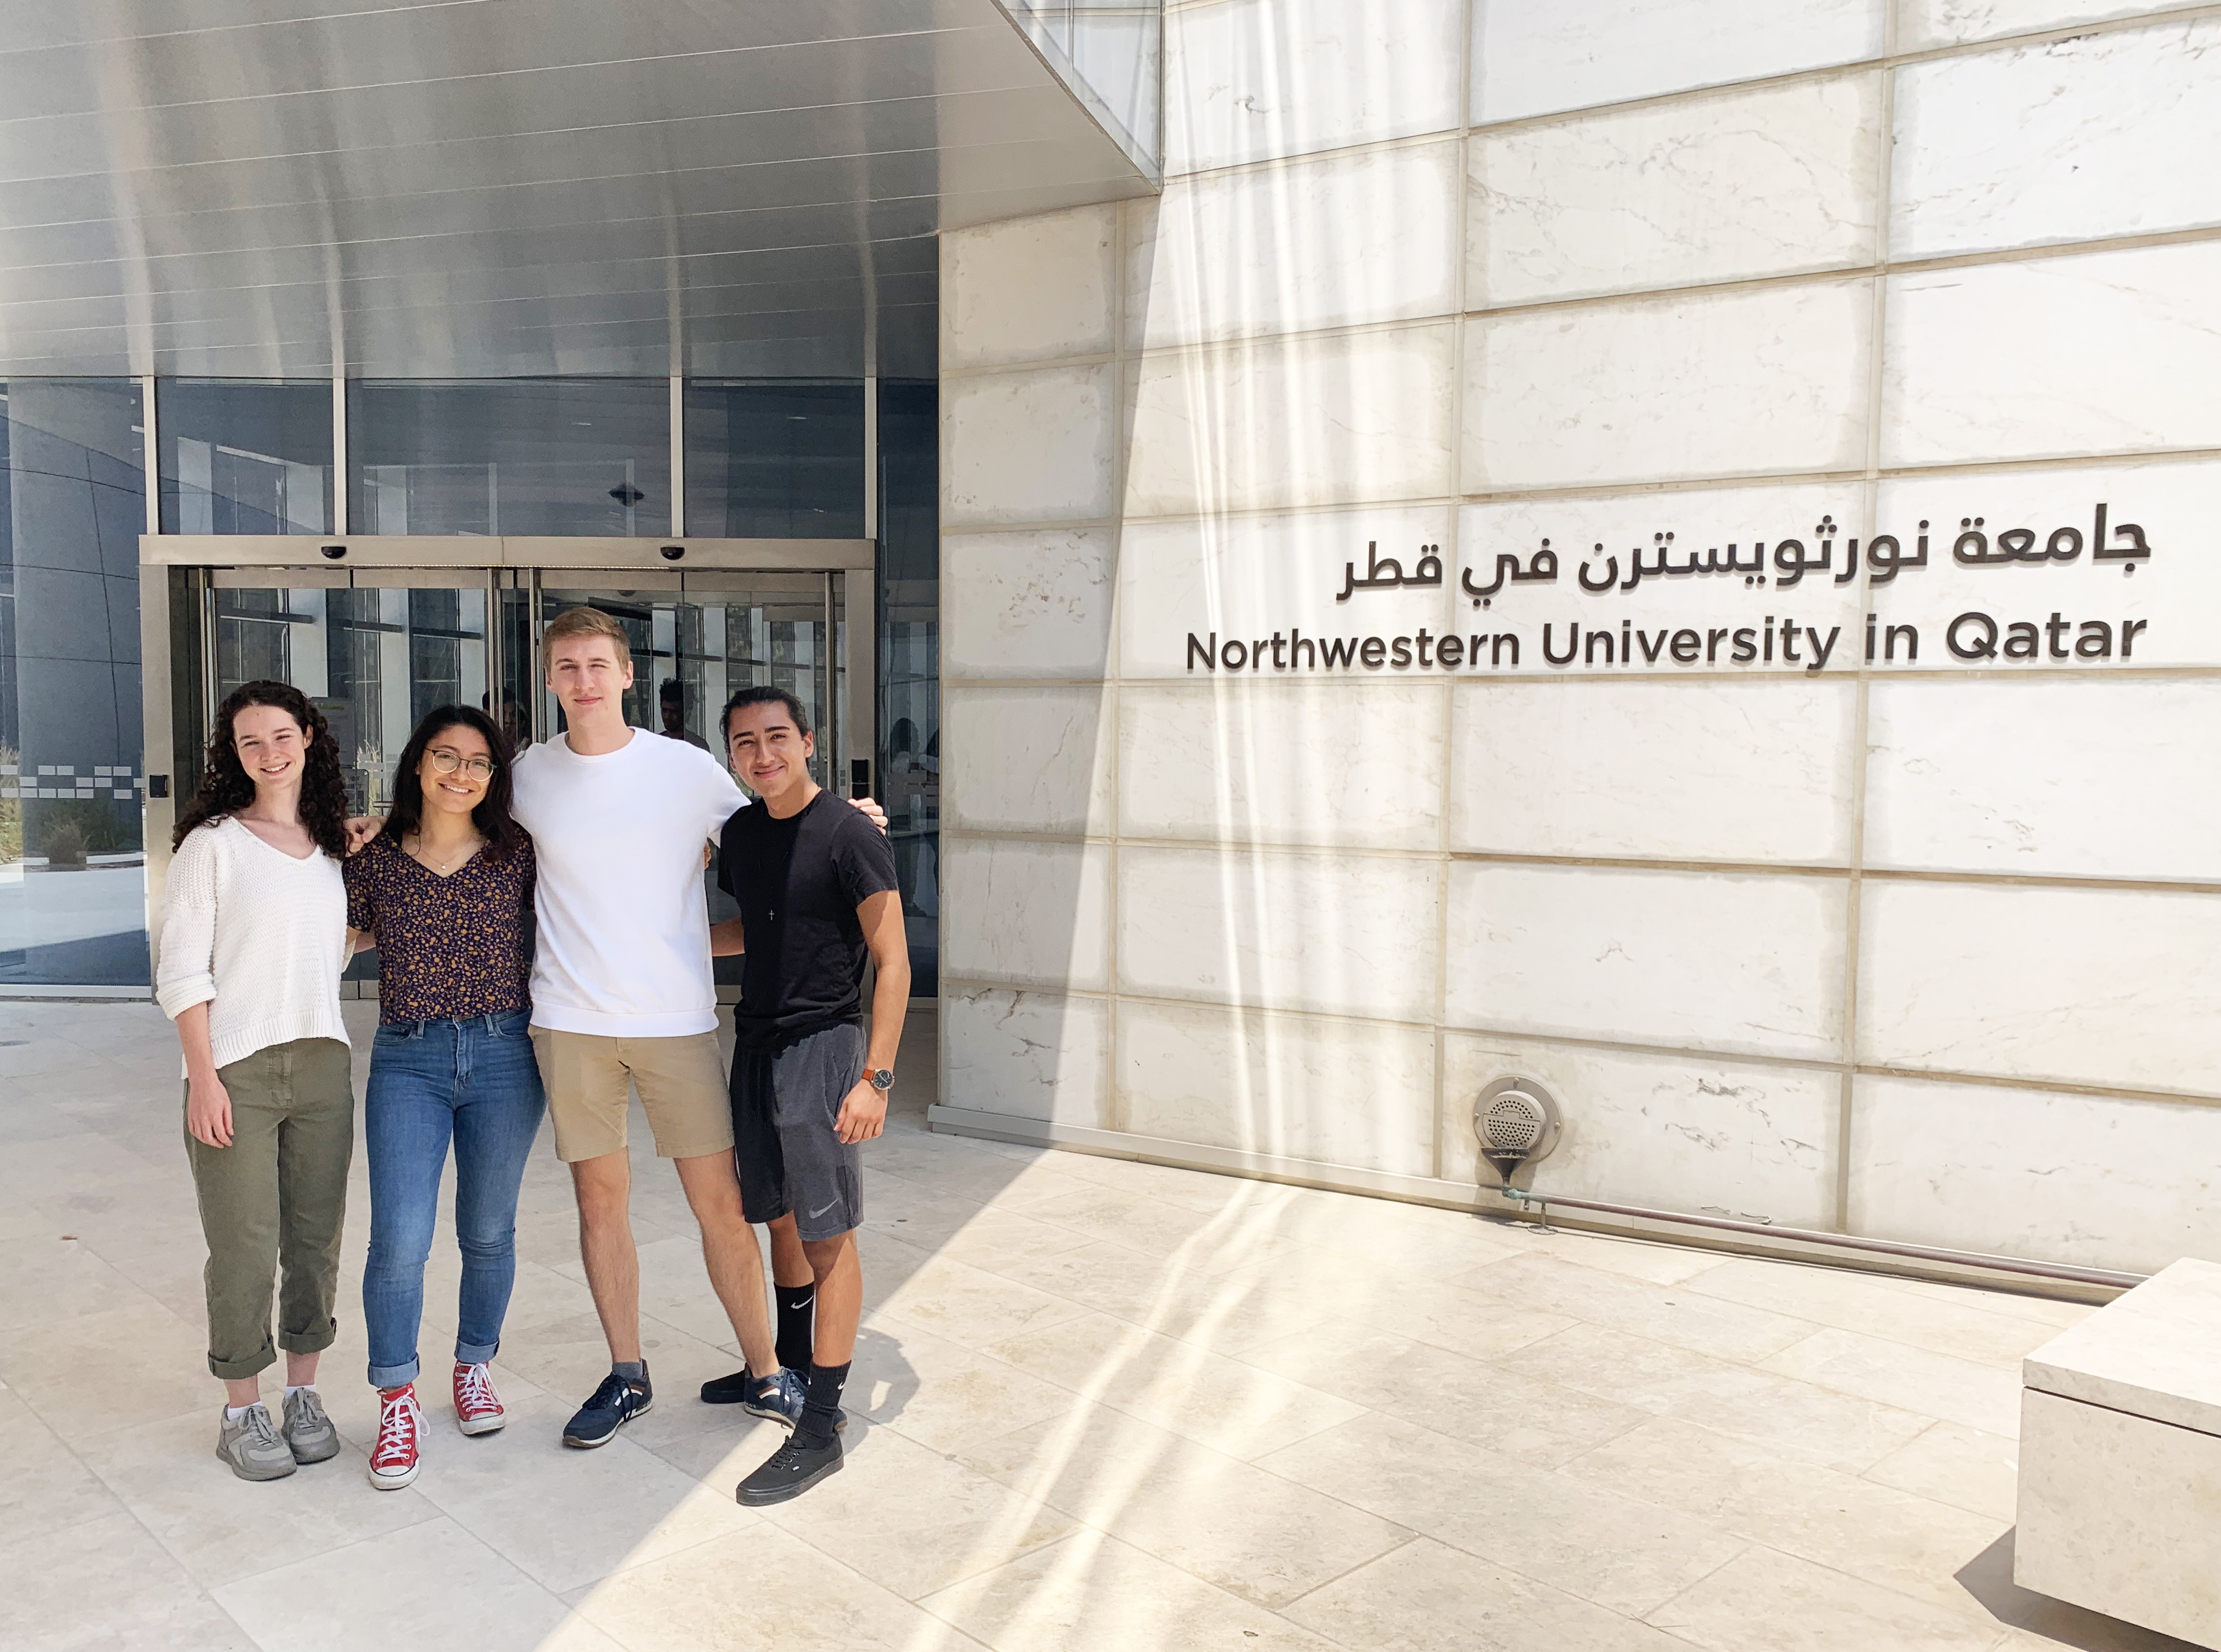 A group of four students from Evanston -- (l to r) Eliza Posner, Leslie Bonilla, Martin Herrmann, and Miguel Aponte -- are spending 16 weeks on Northwestern's Qatar campus to learn about and immerse themselves in the values and vibrancy of the Middle East.